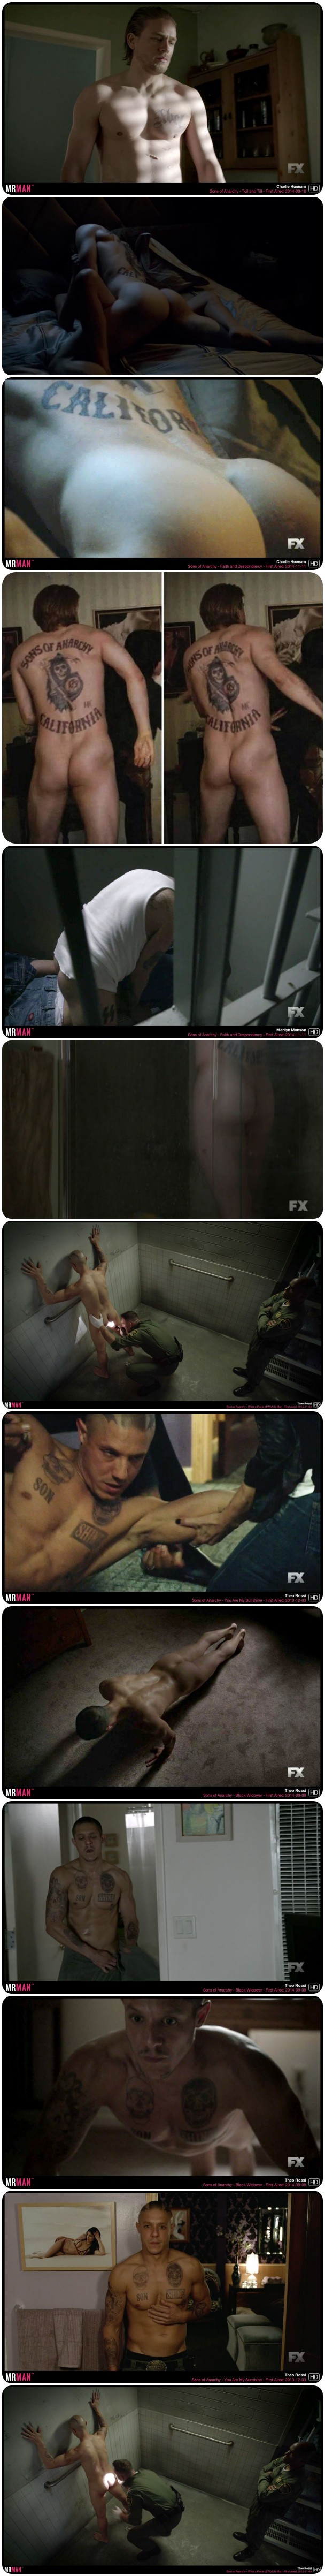 Son of Anarchy naked men Charlie Hunnam, Theo Rossi